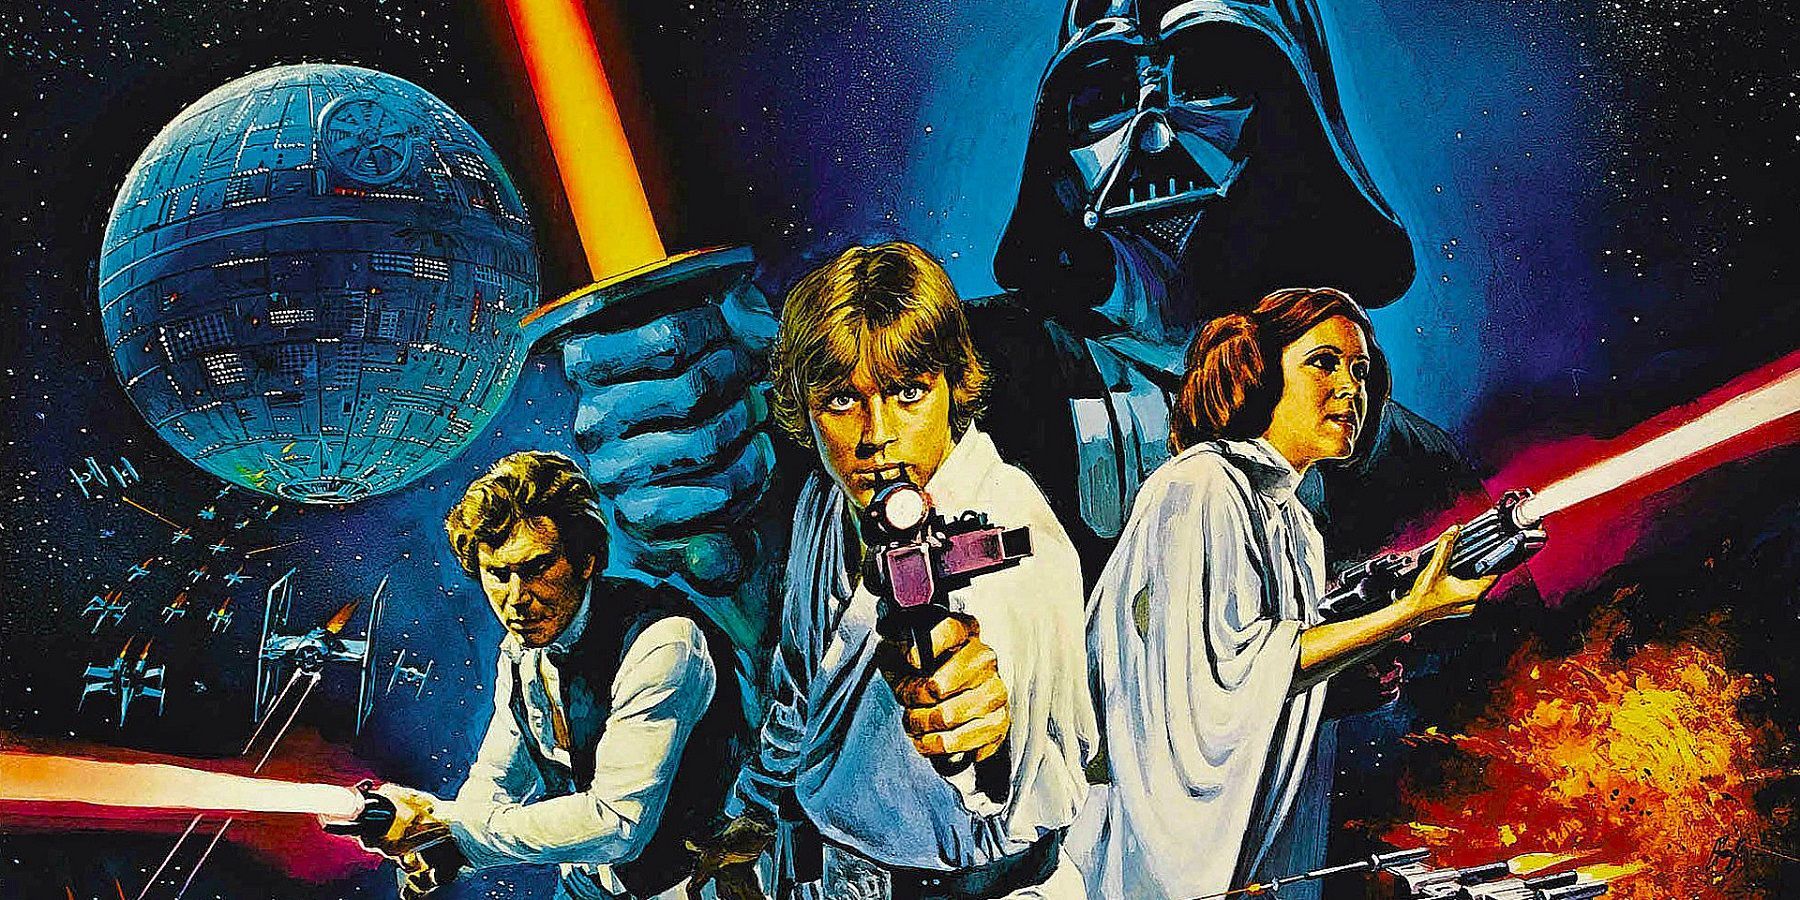 Mark Hamill Celebrates Star Wars May The 4th Day With Sweet Message